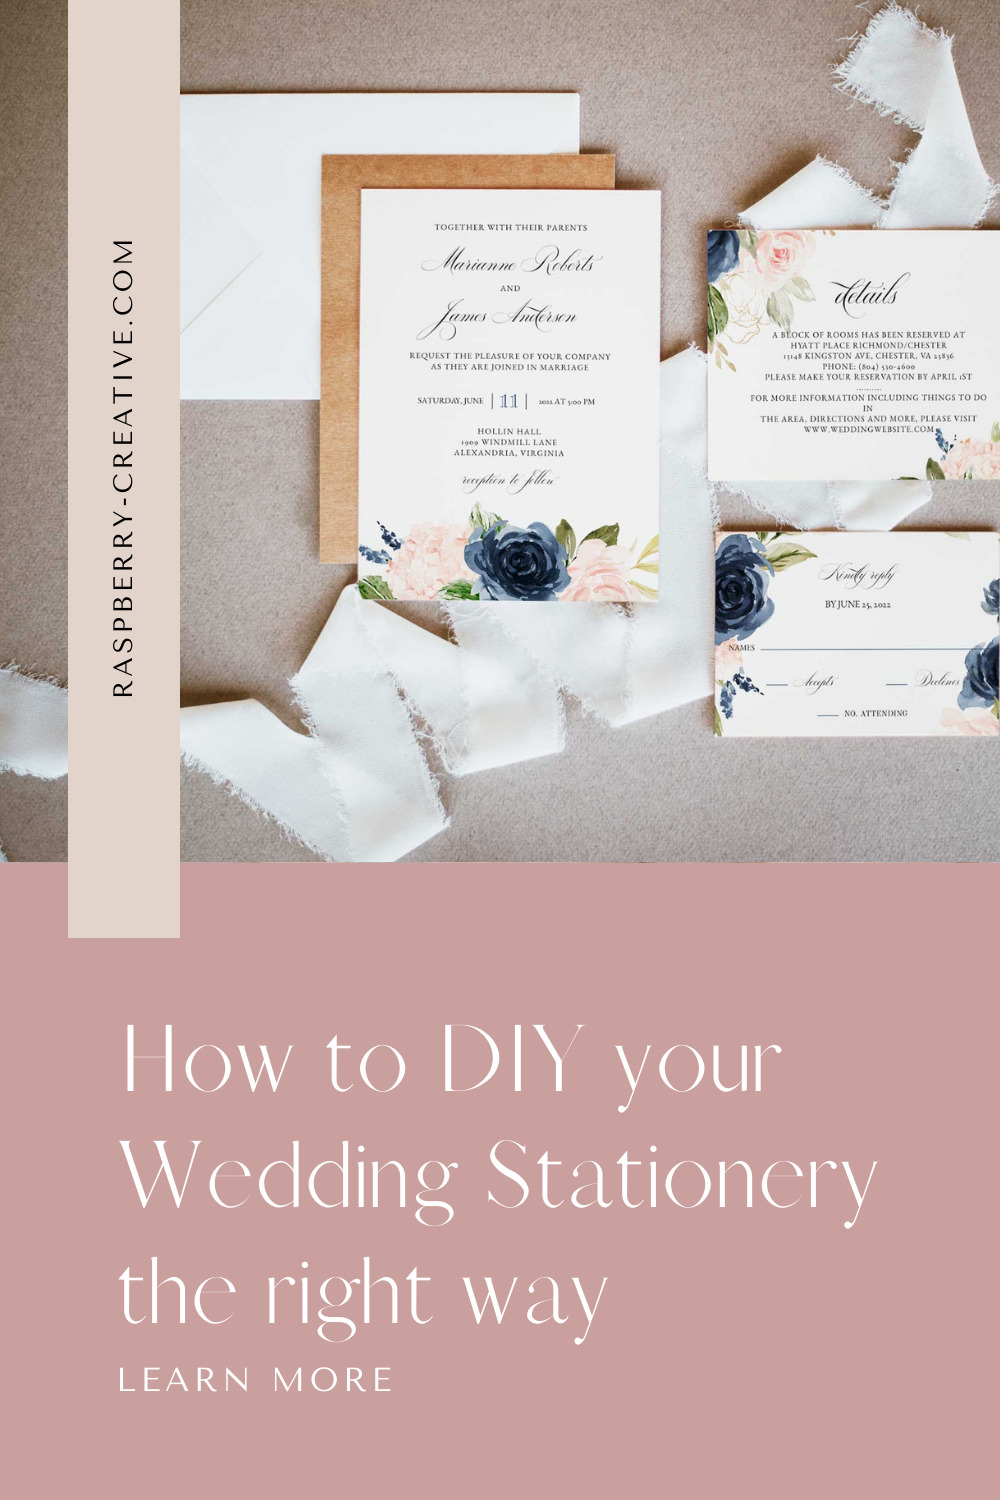 How to DIY your Wedding Stationery the Right Way